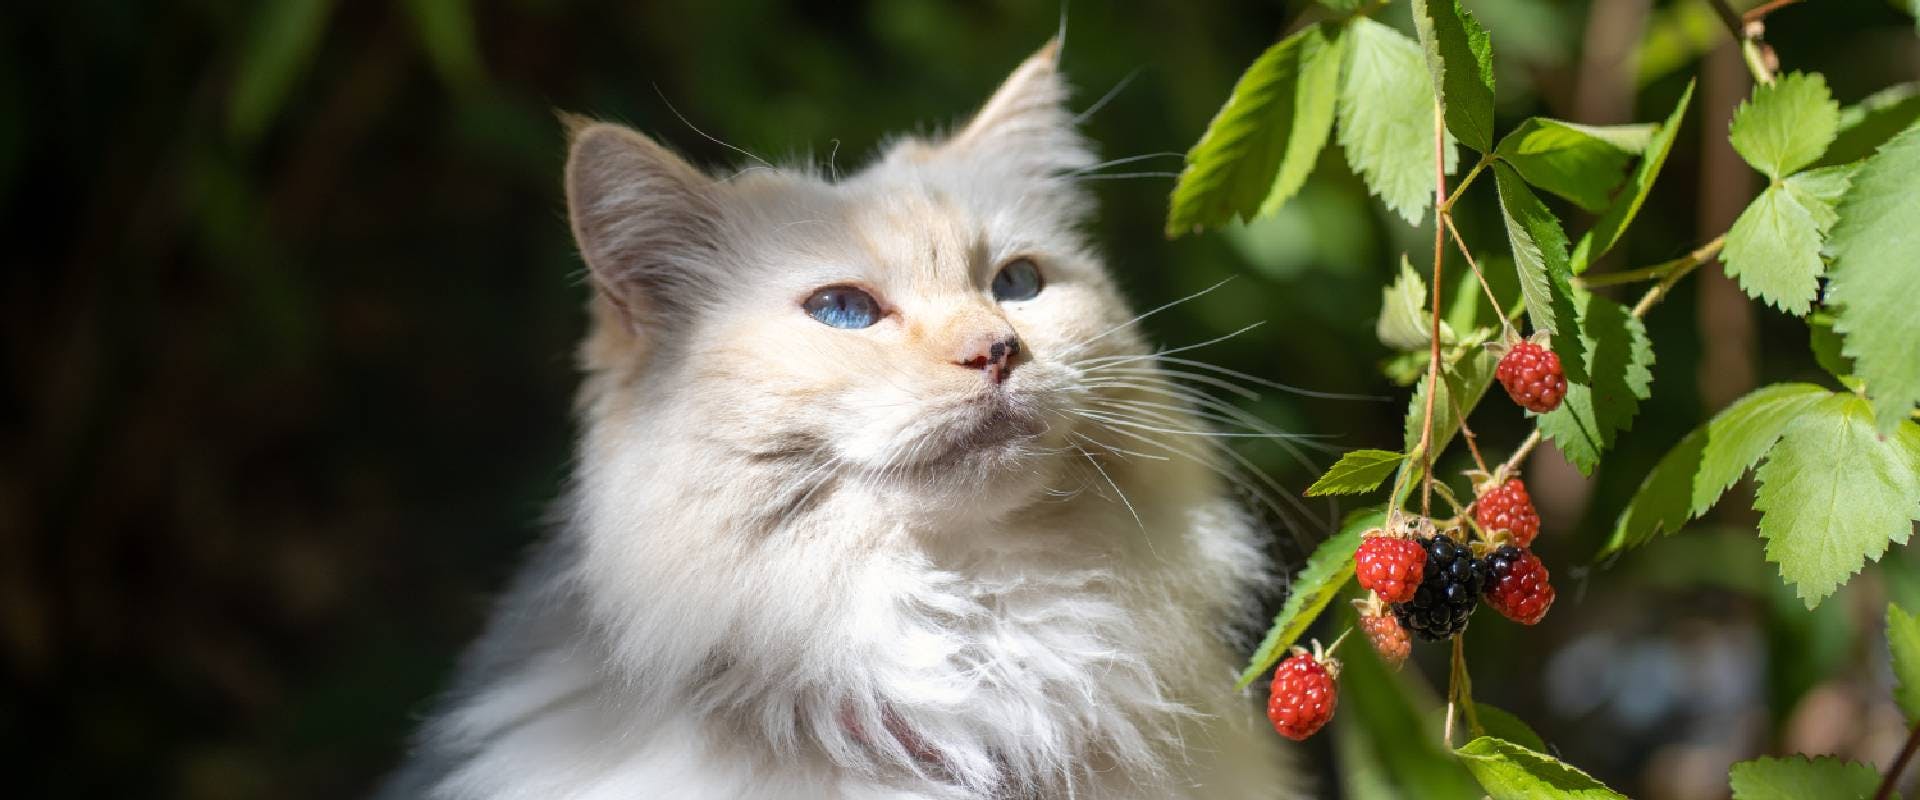 Cat looking at a berry plant